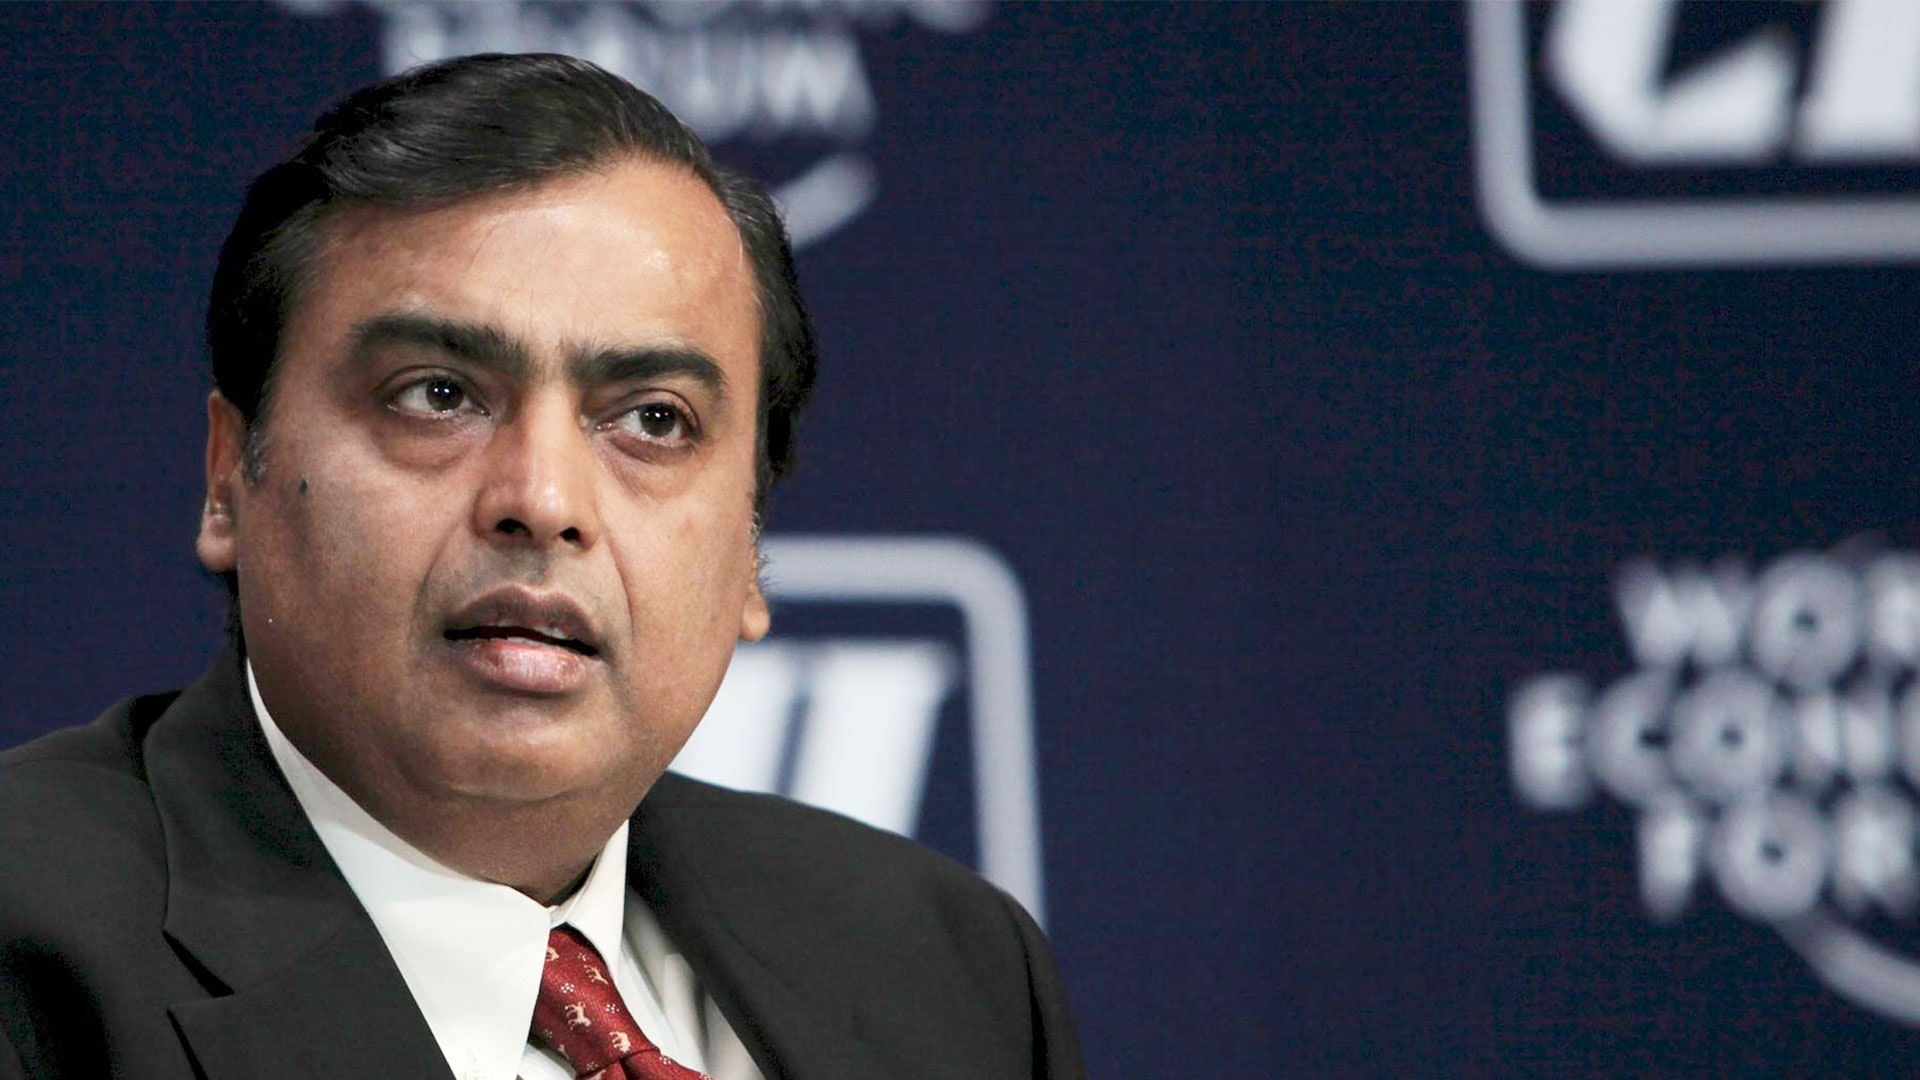 Who is Mukesh Ambani - India's Wealthiest Tycoon: Bio, Career, Private Life and Protected like "National Asset"